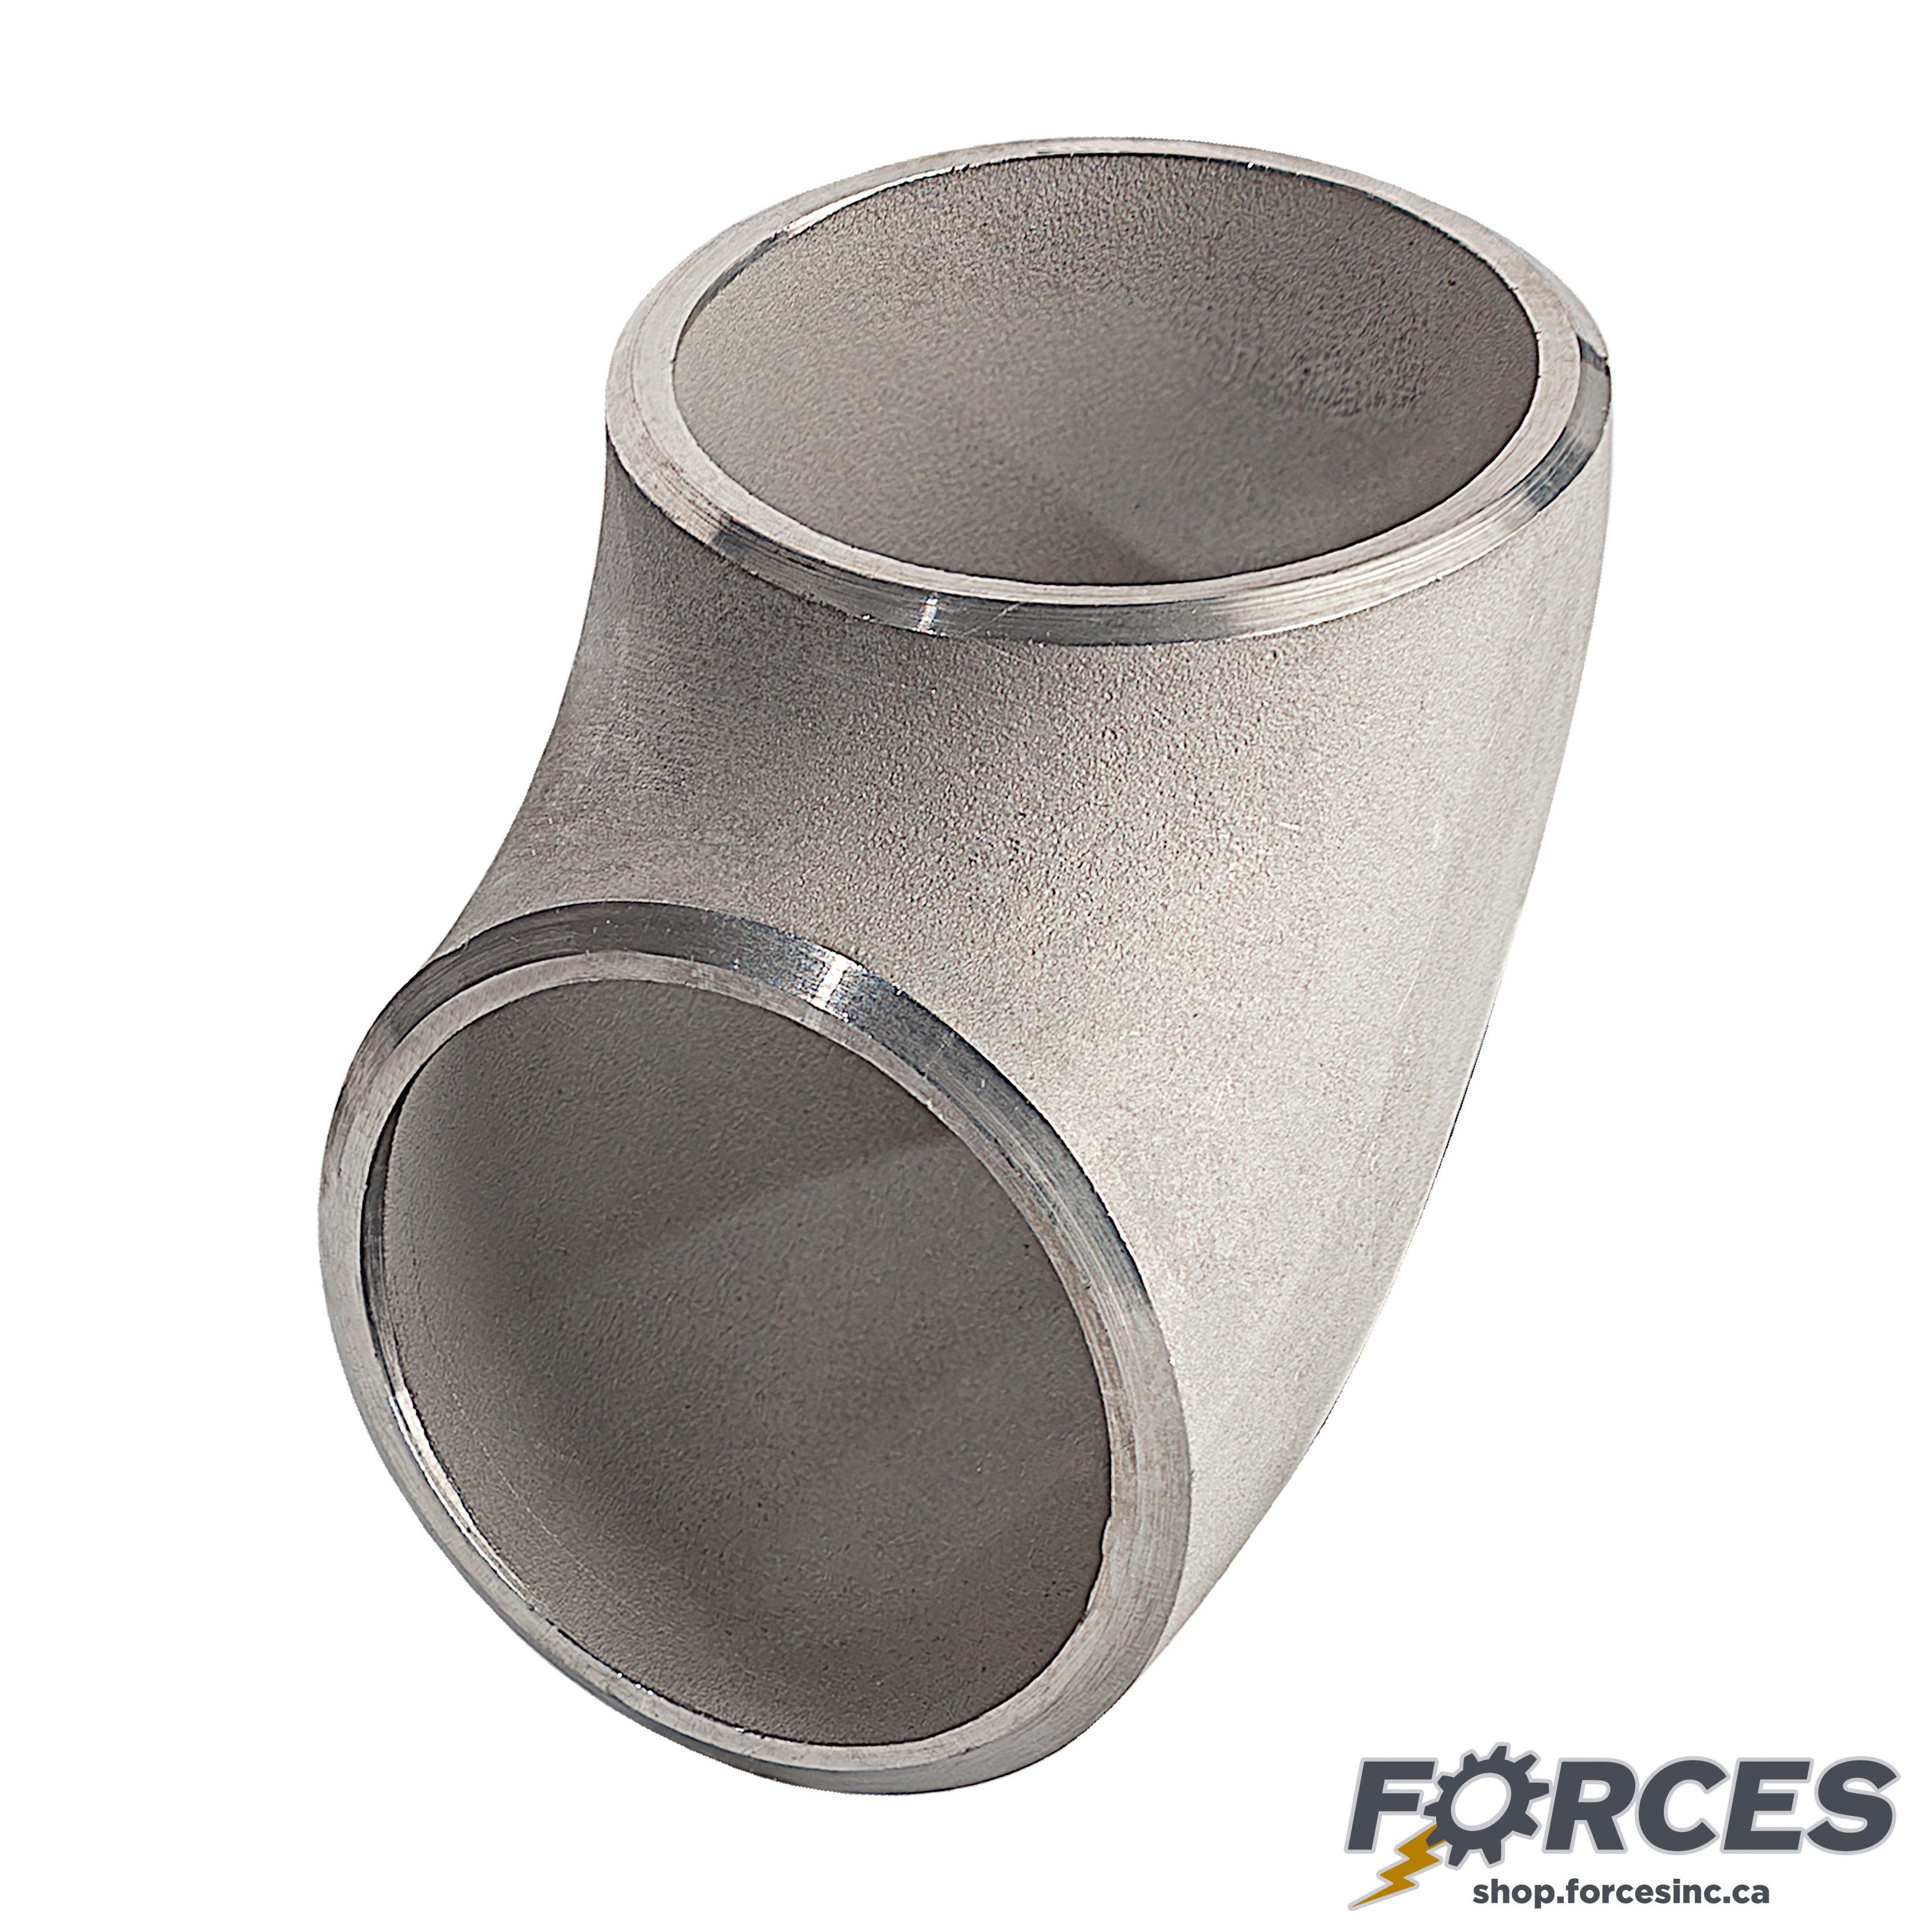 1-1/2" Elbow 45° SCH 40 Butt Weld - Stainless Steel 316 - Forces Inc